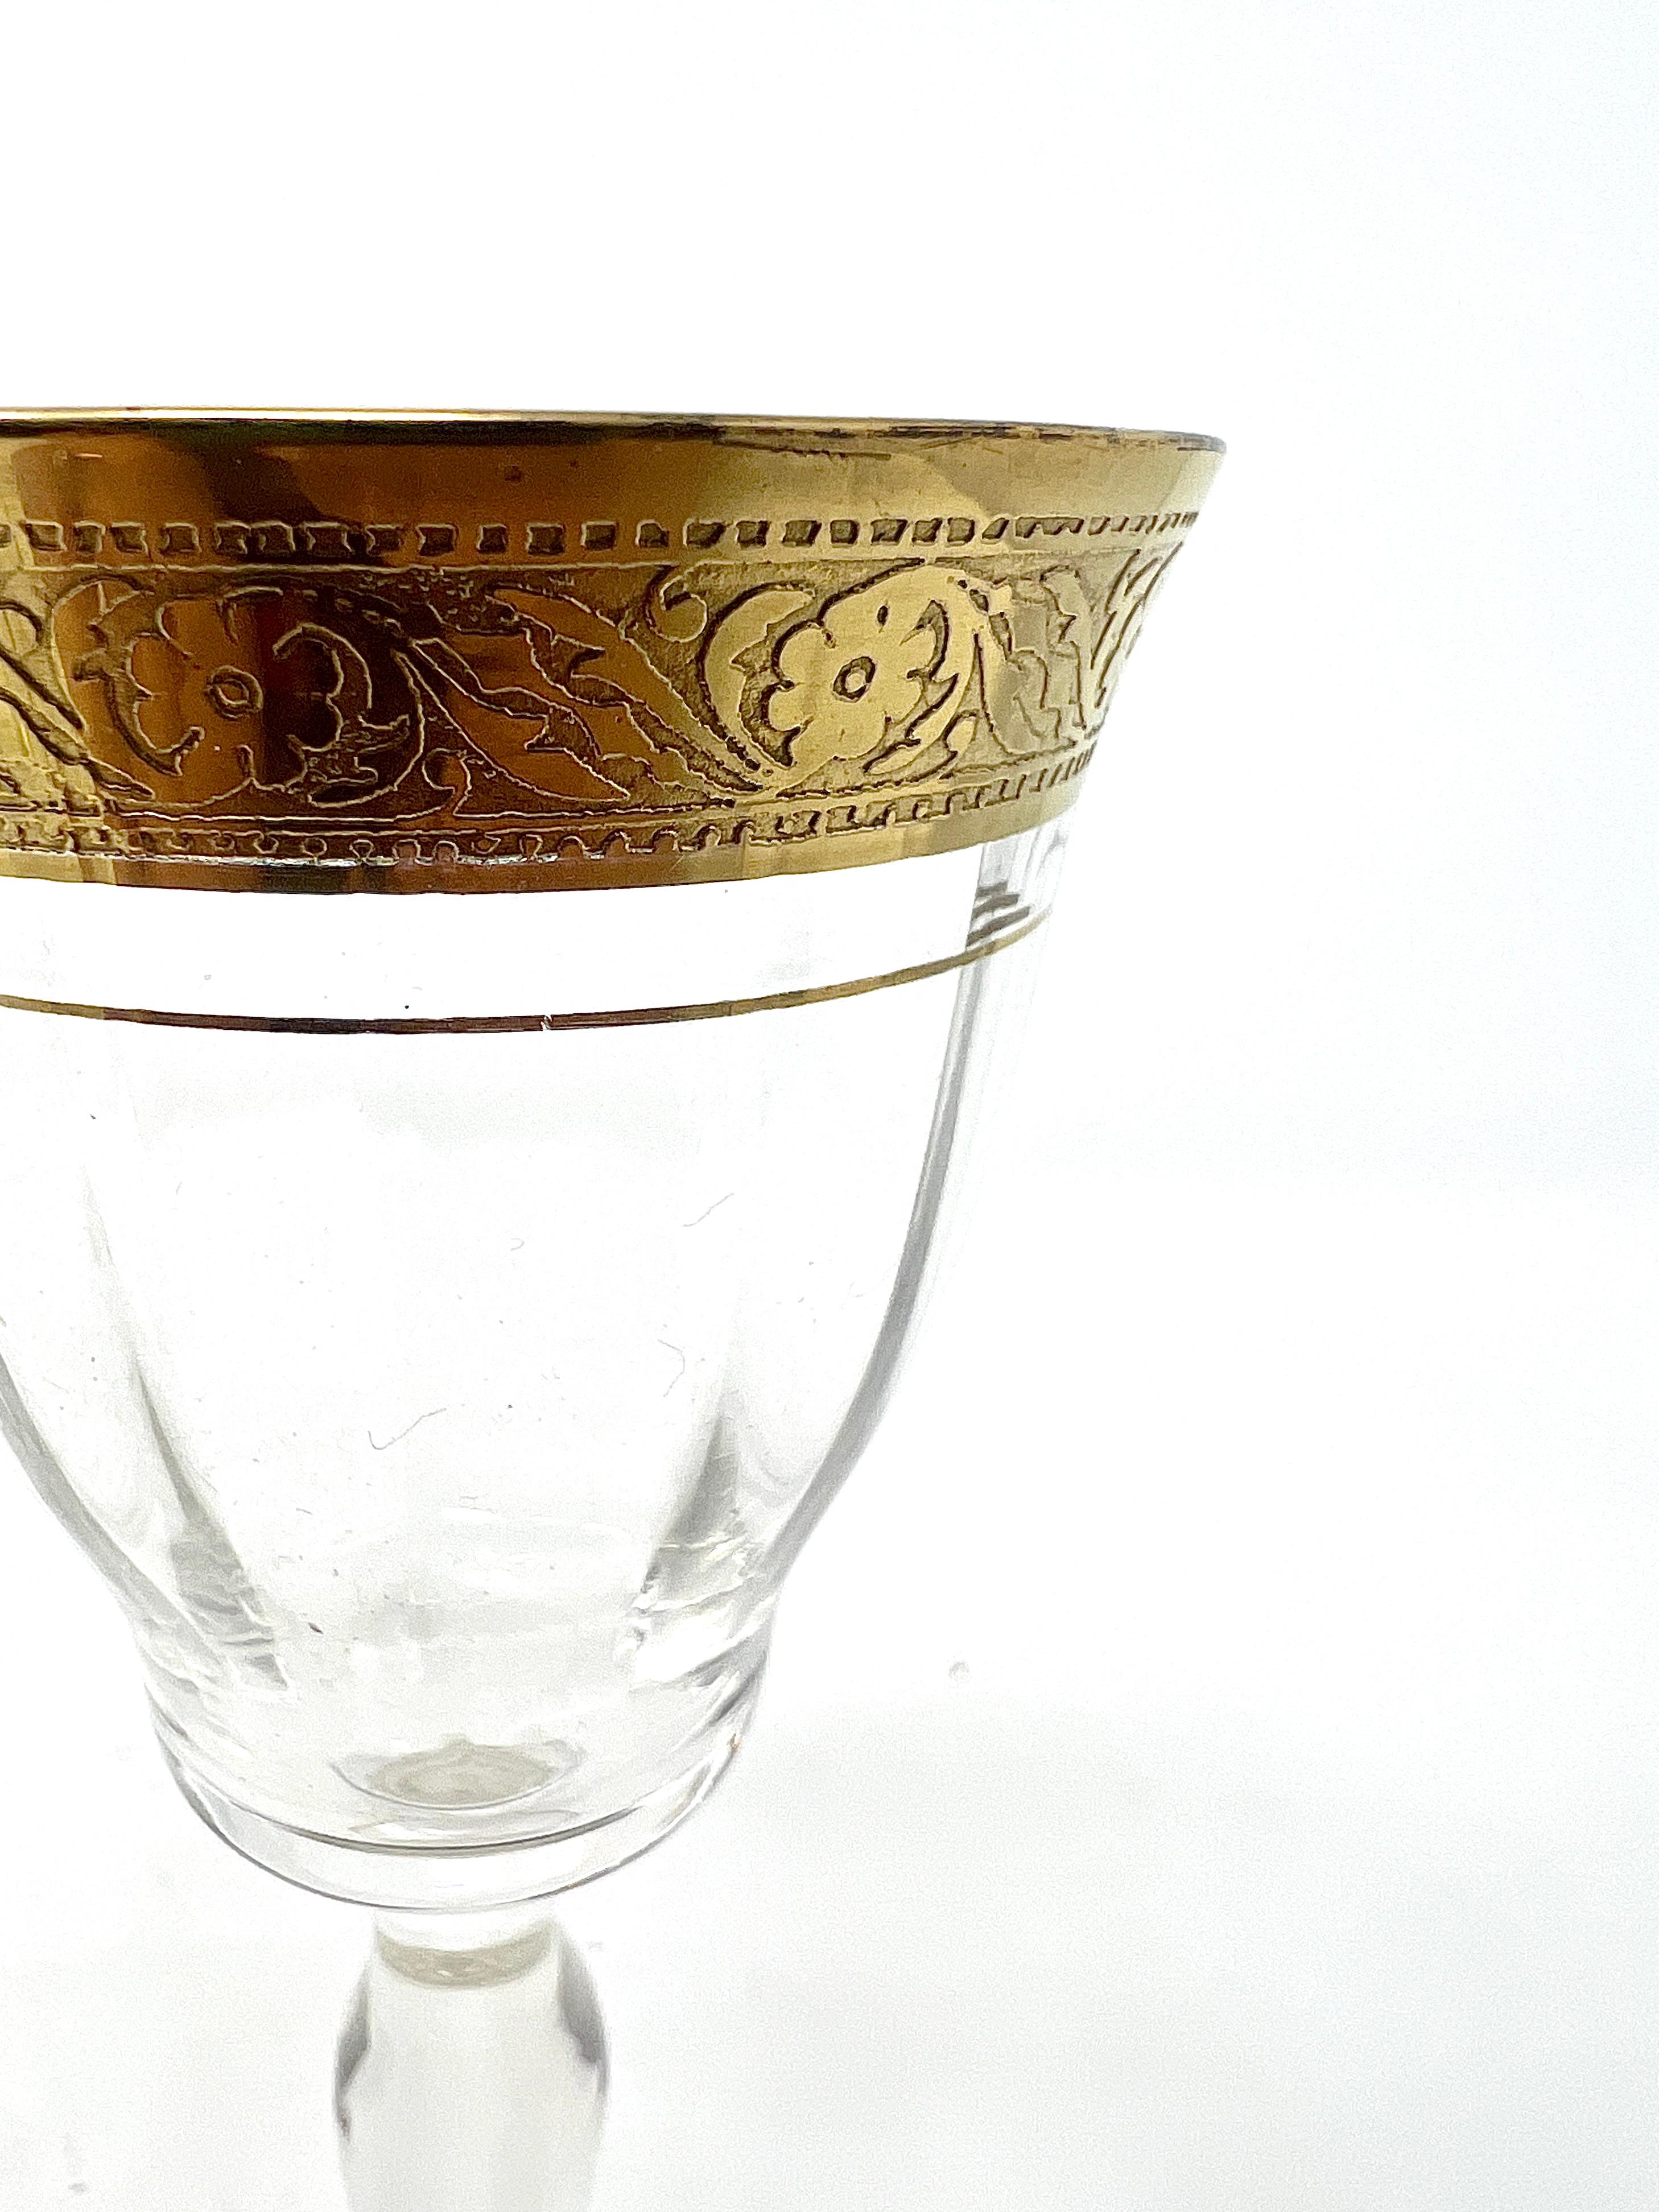 Set of 8 Estate Cut Crystal with Gold Etching Cordial Glasses, Circa 1930-1940. For Sale 1